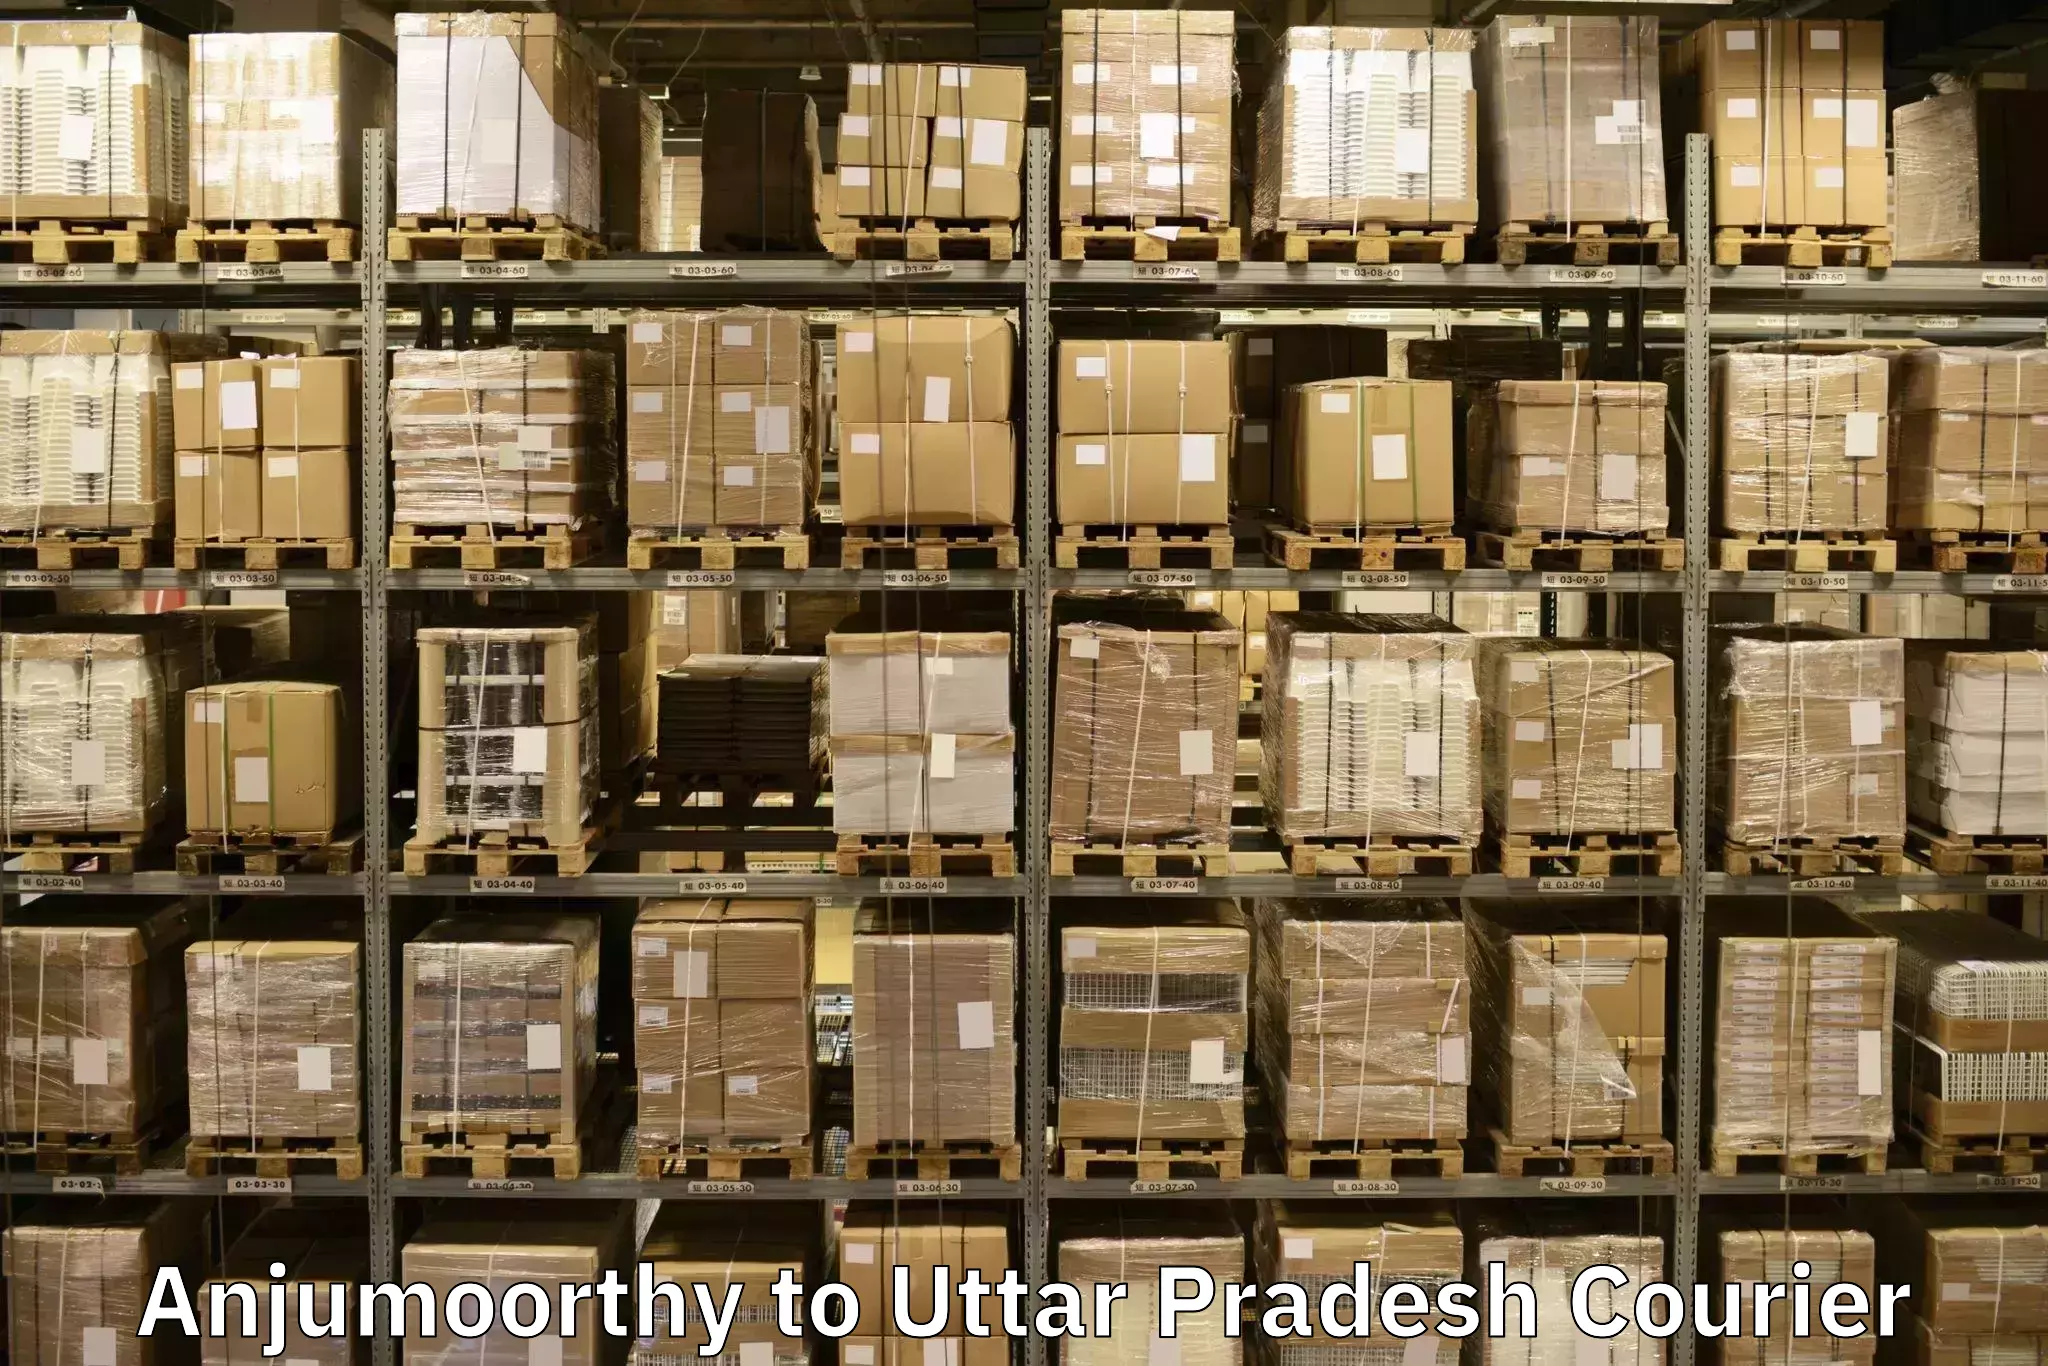 Professional packing services Anjumoorthy to Lucknow